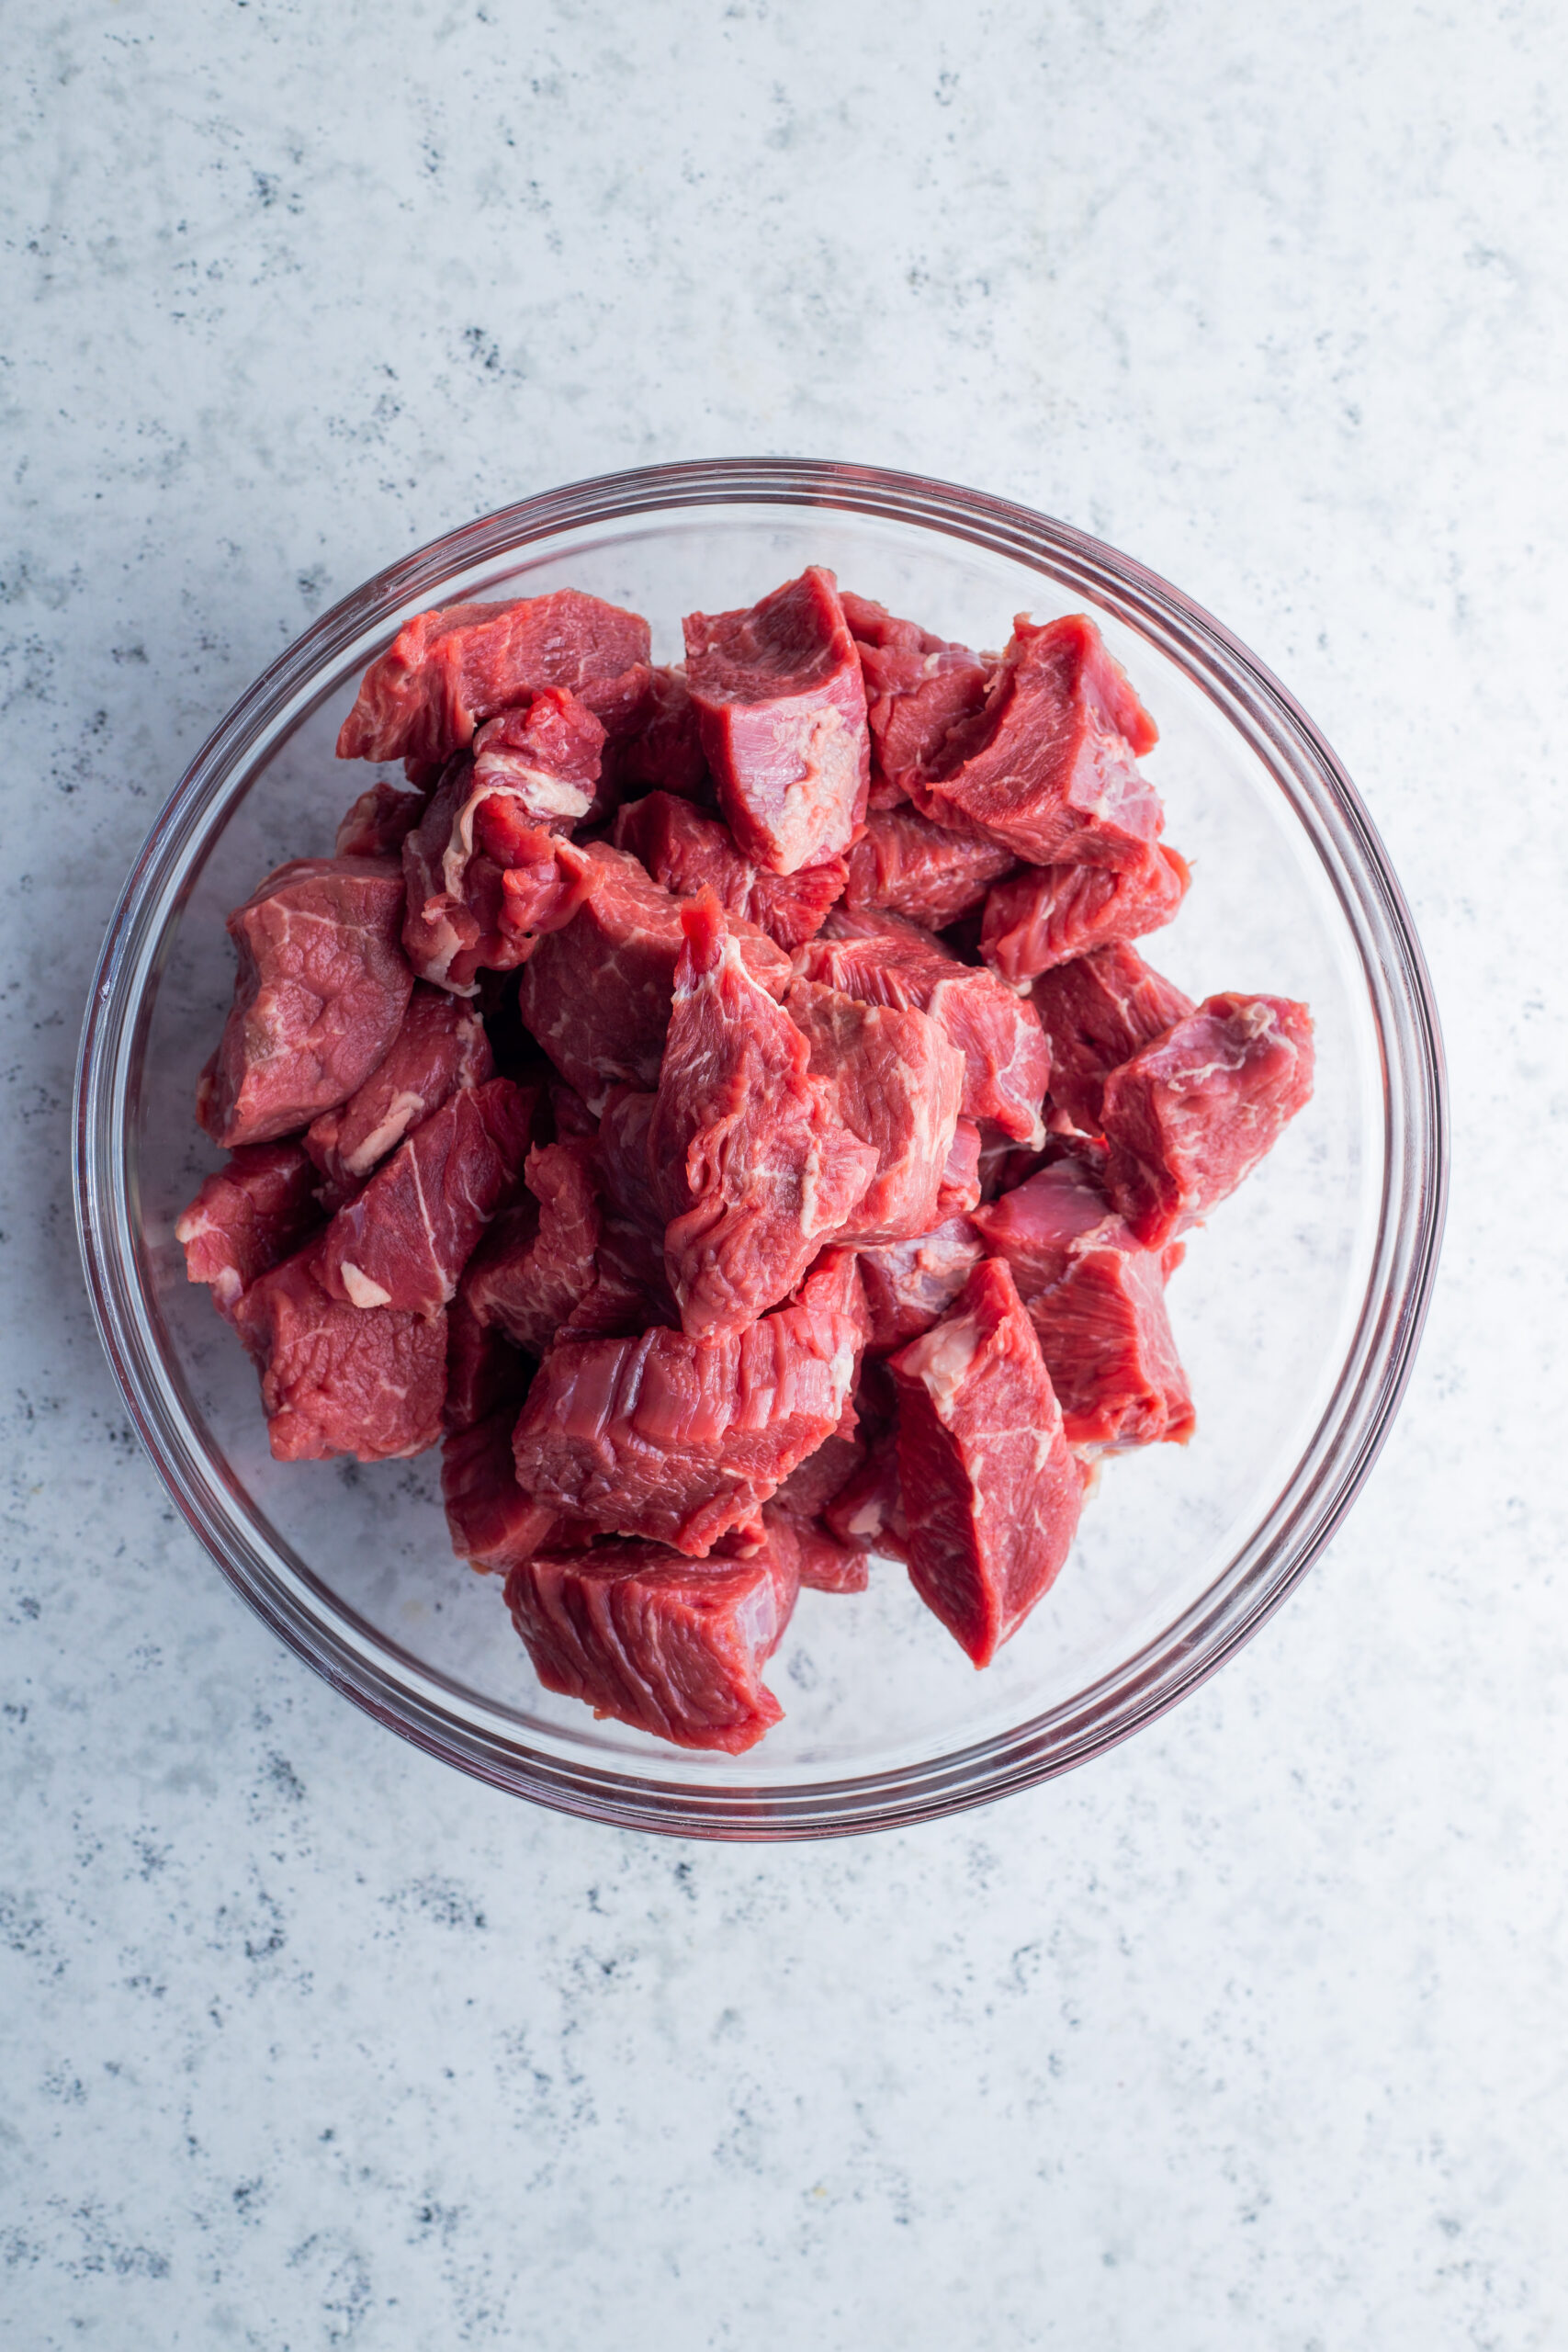 cubed beef in a bowl